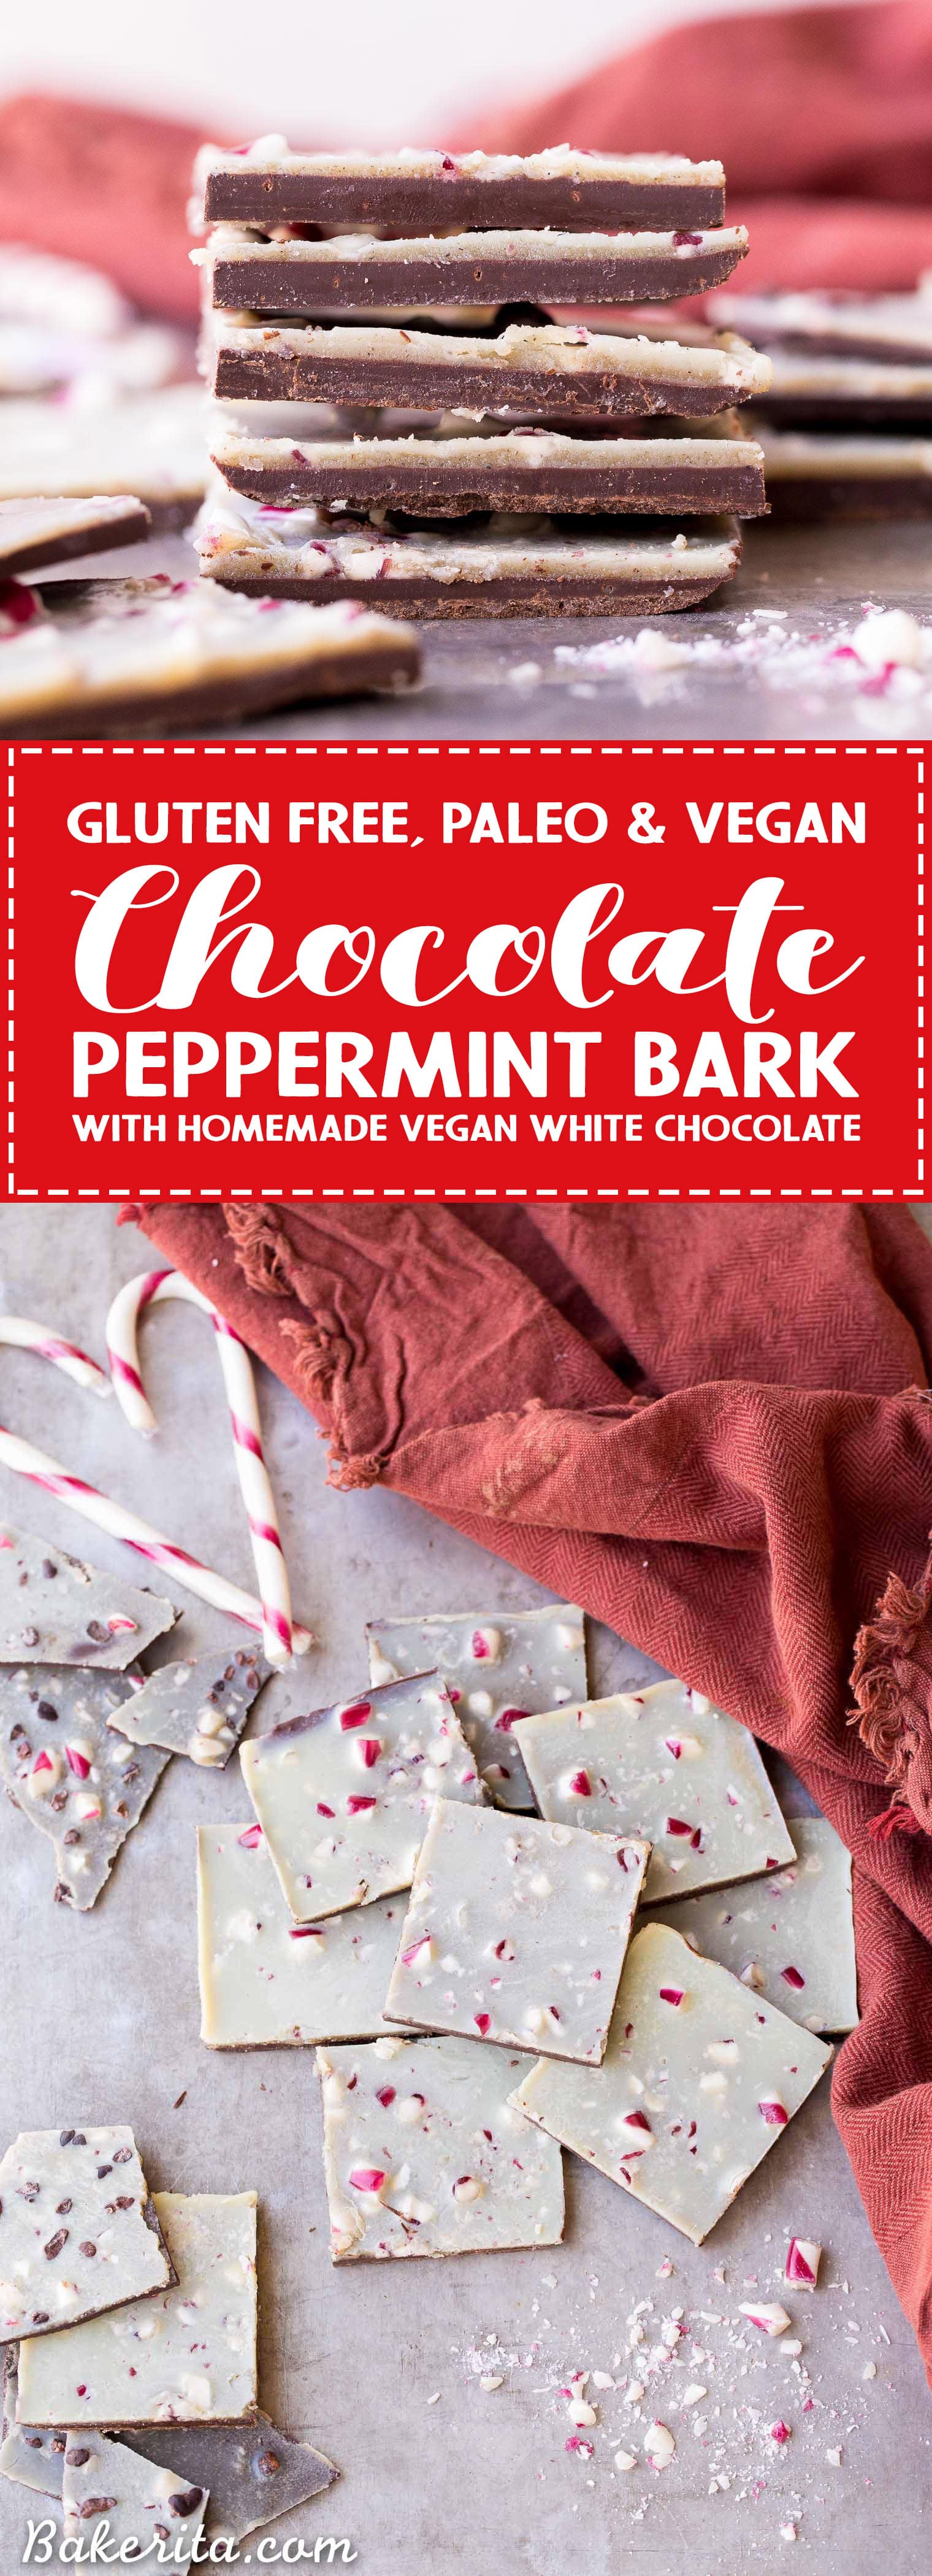 This Chocolate Peppermint Bark is a healthier twist on the holiday classic! It has a layer of dark chocolate topped with minty homemade vegan white chocolate and a sprinkling of crushed peppermint candies. You'll adore this gluten-free, paleo and vegan peppermint bark!